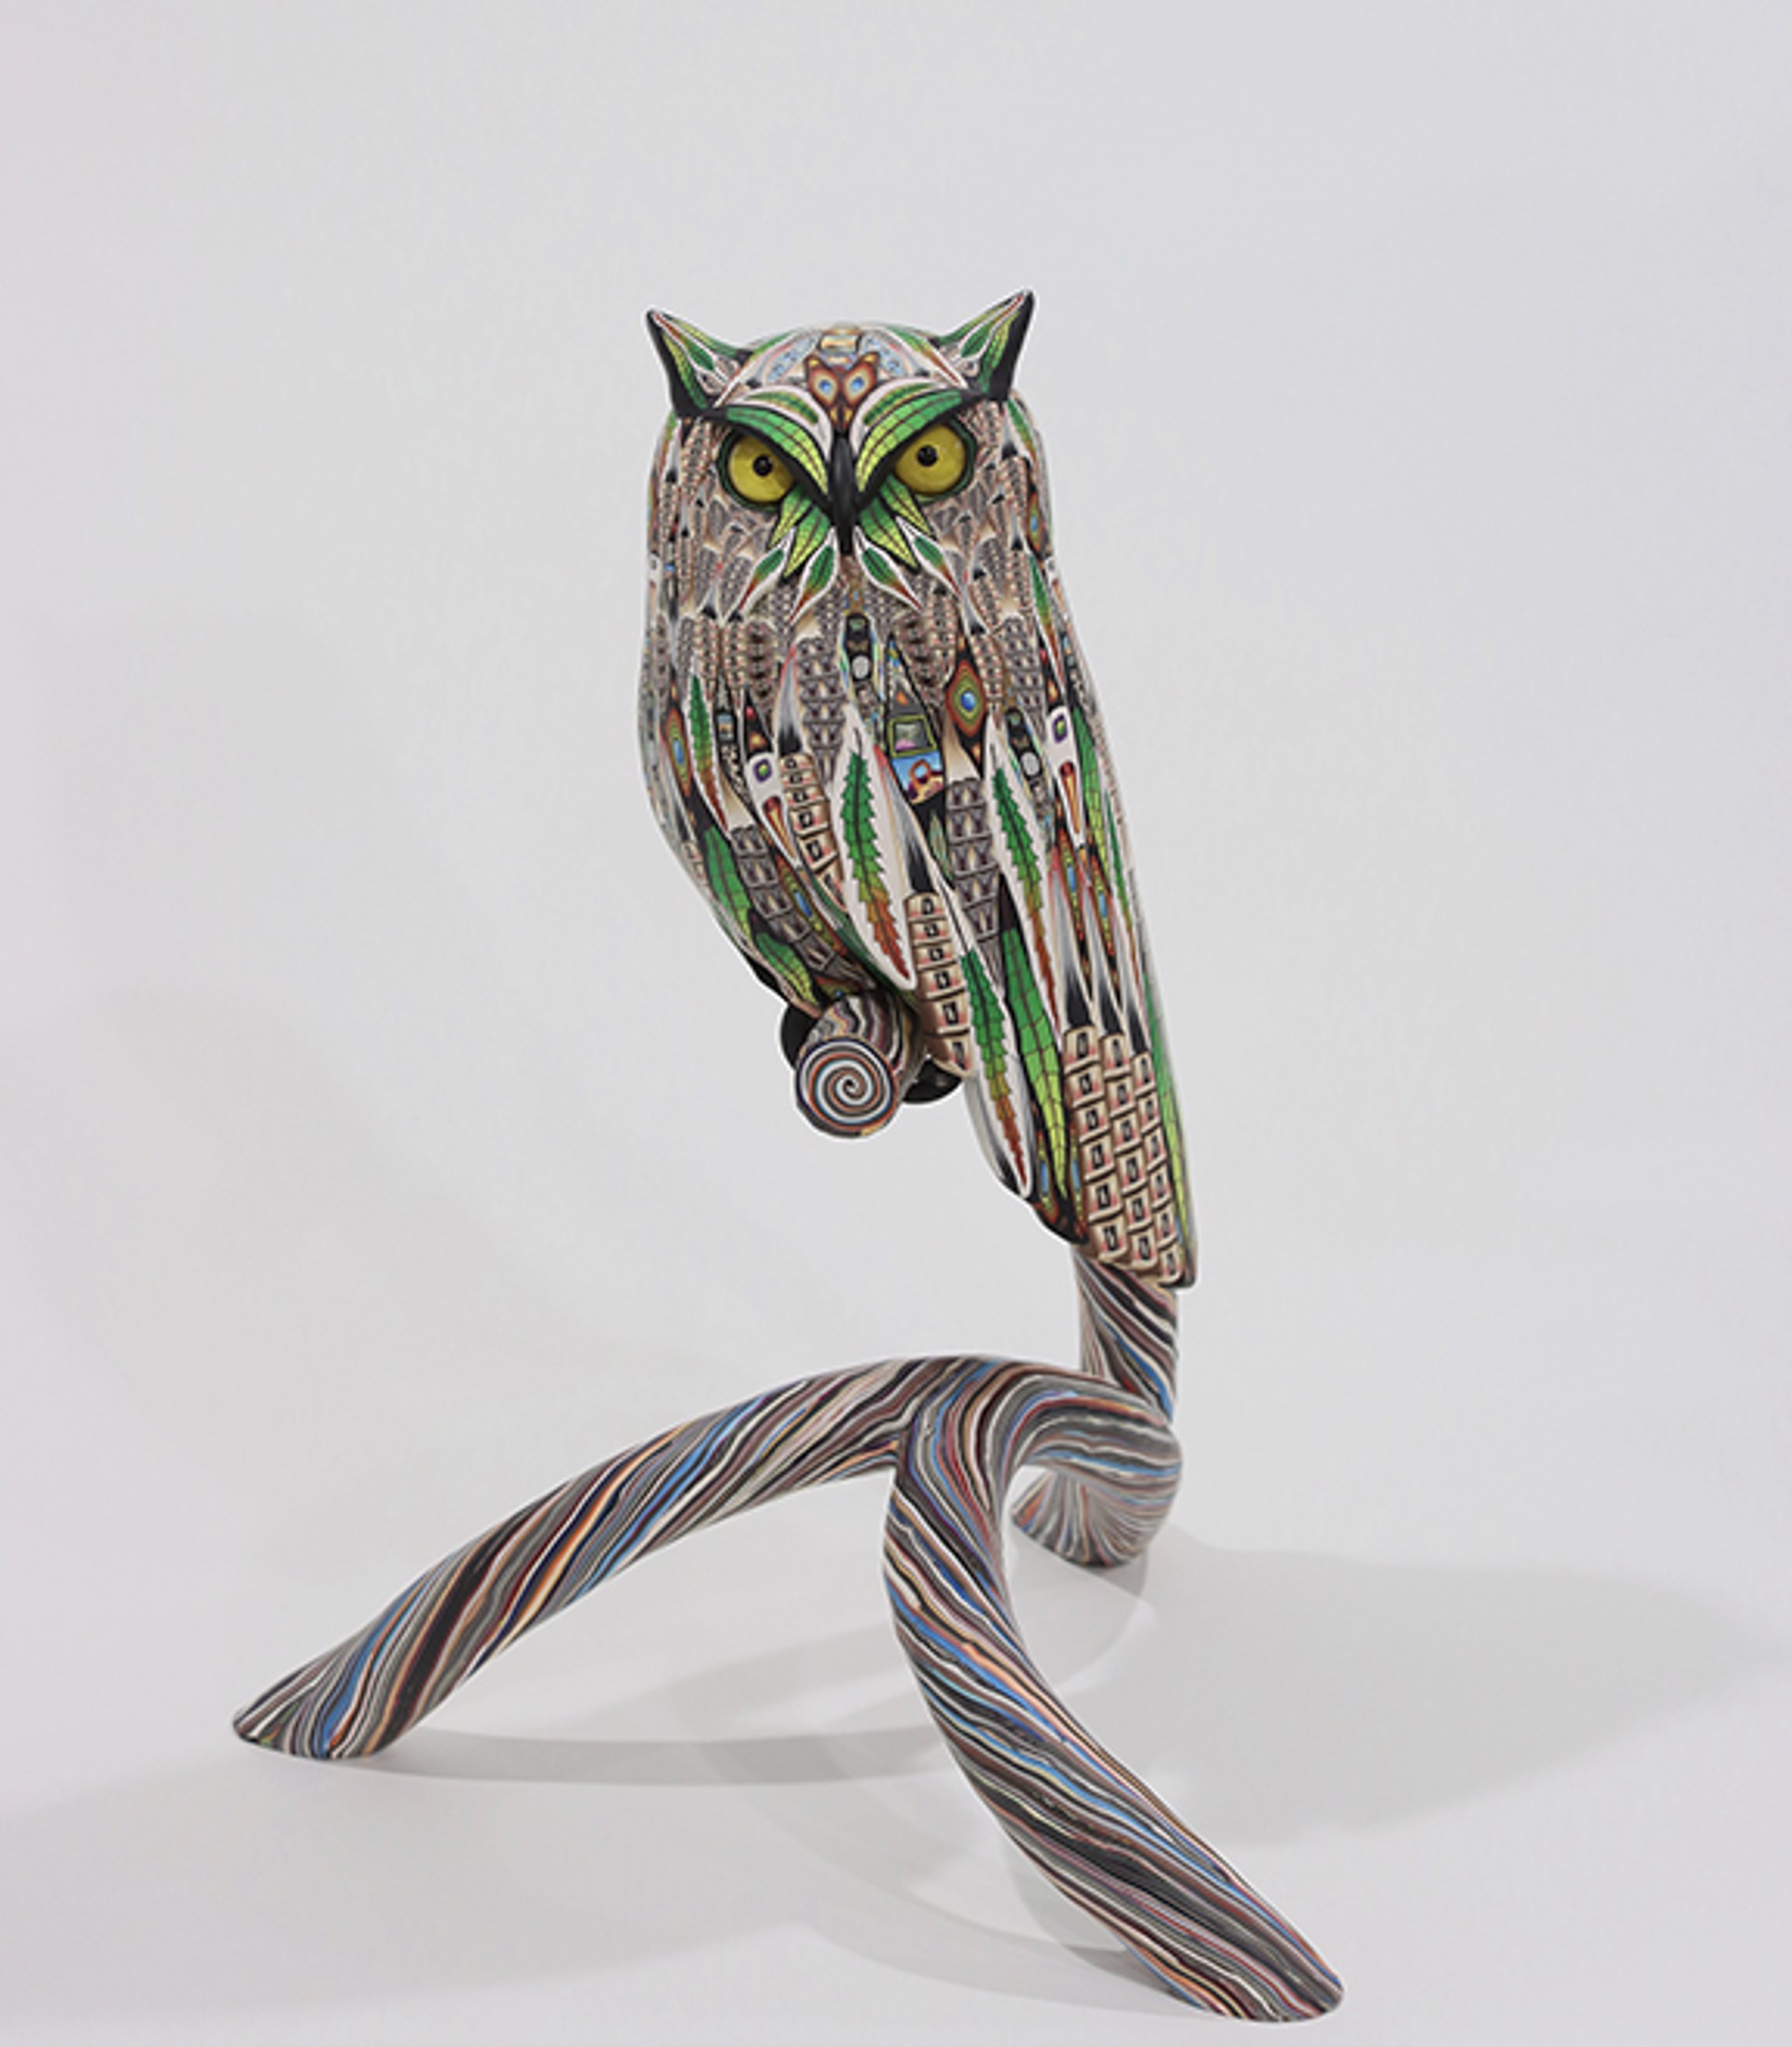 Large Owl by Adam Thomas Rees